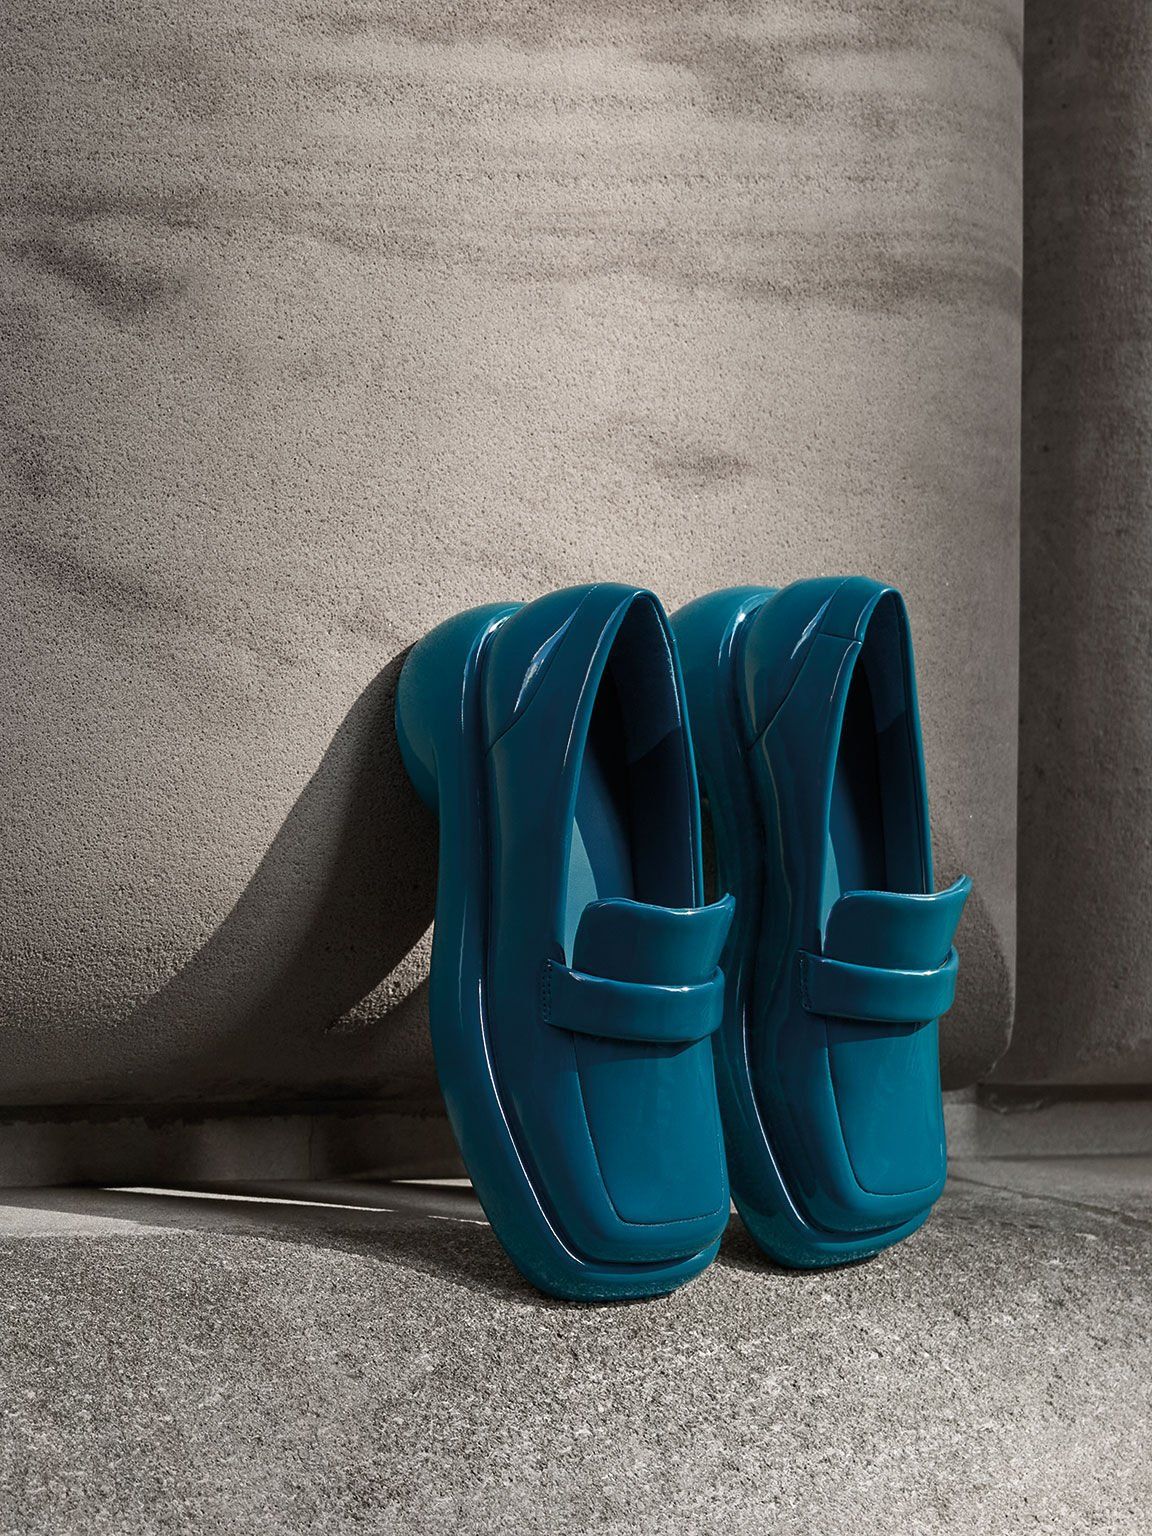 Blue Loafers: Stylish Footwear for Casual Comfort